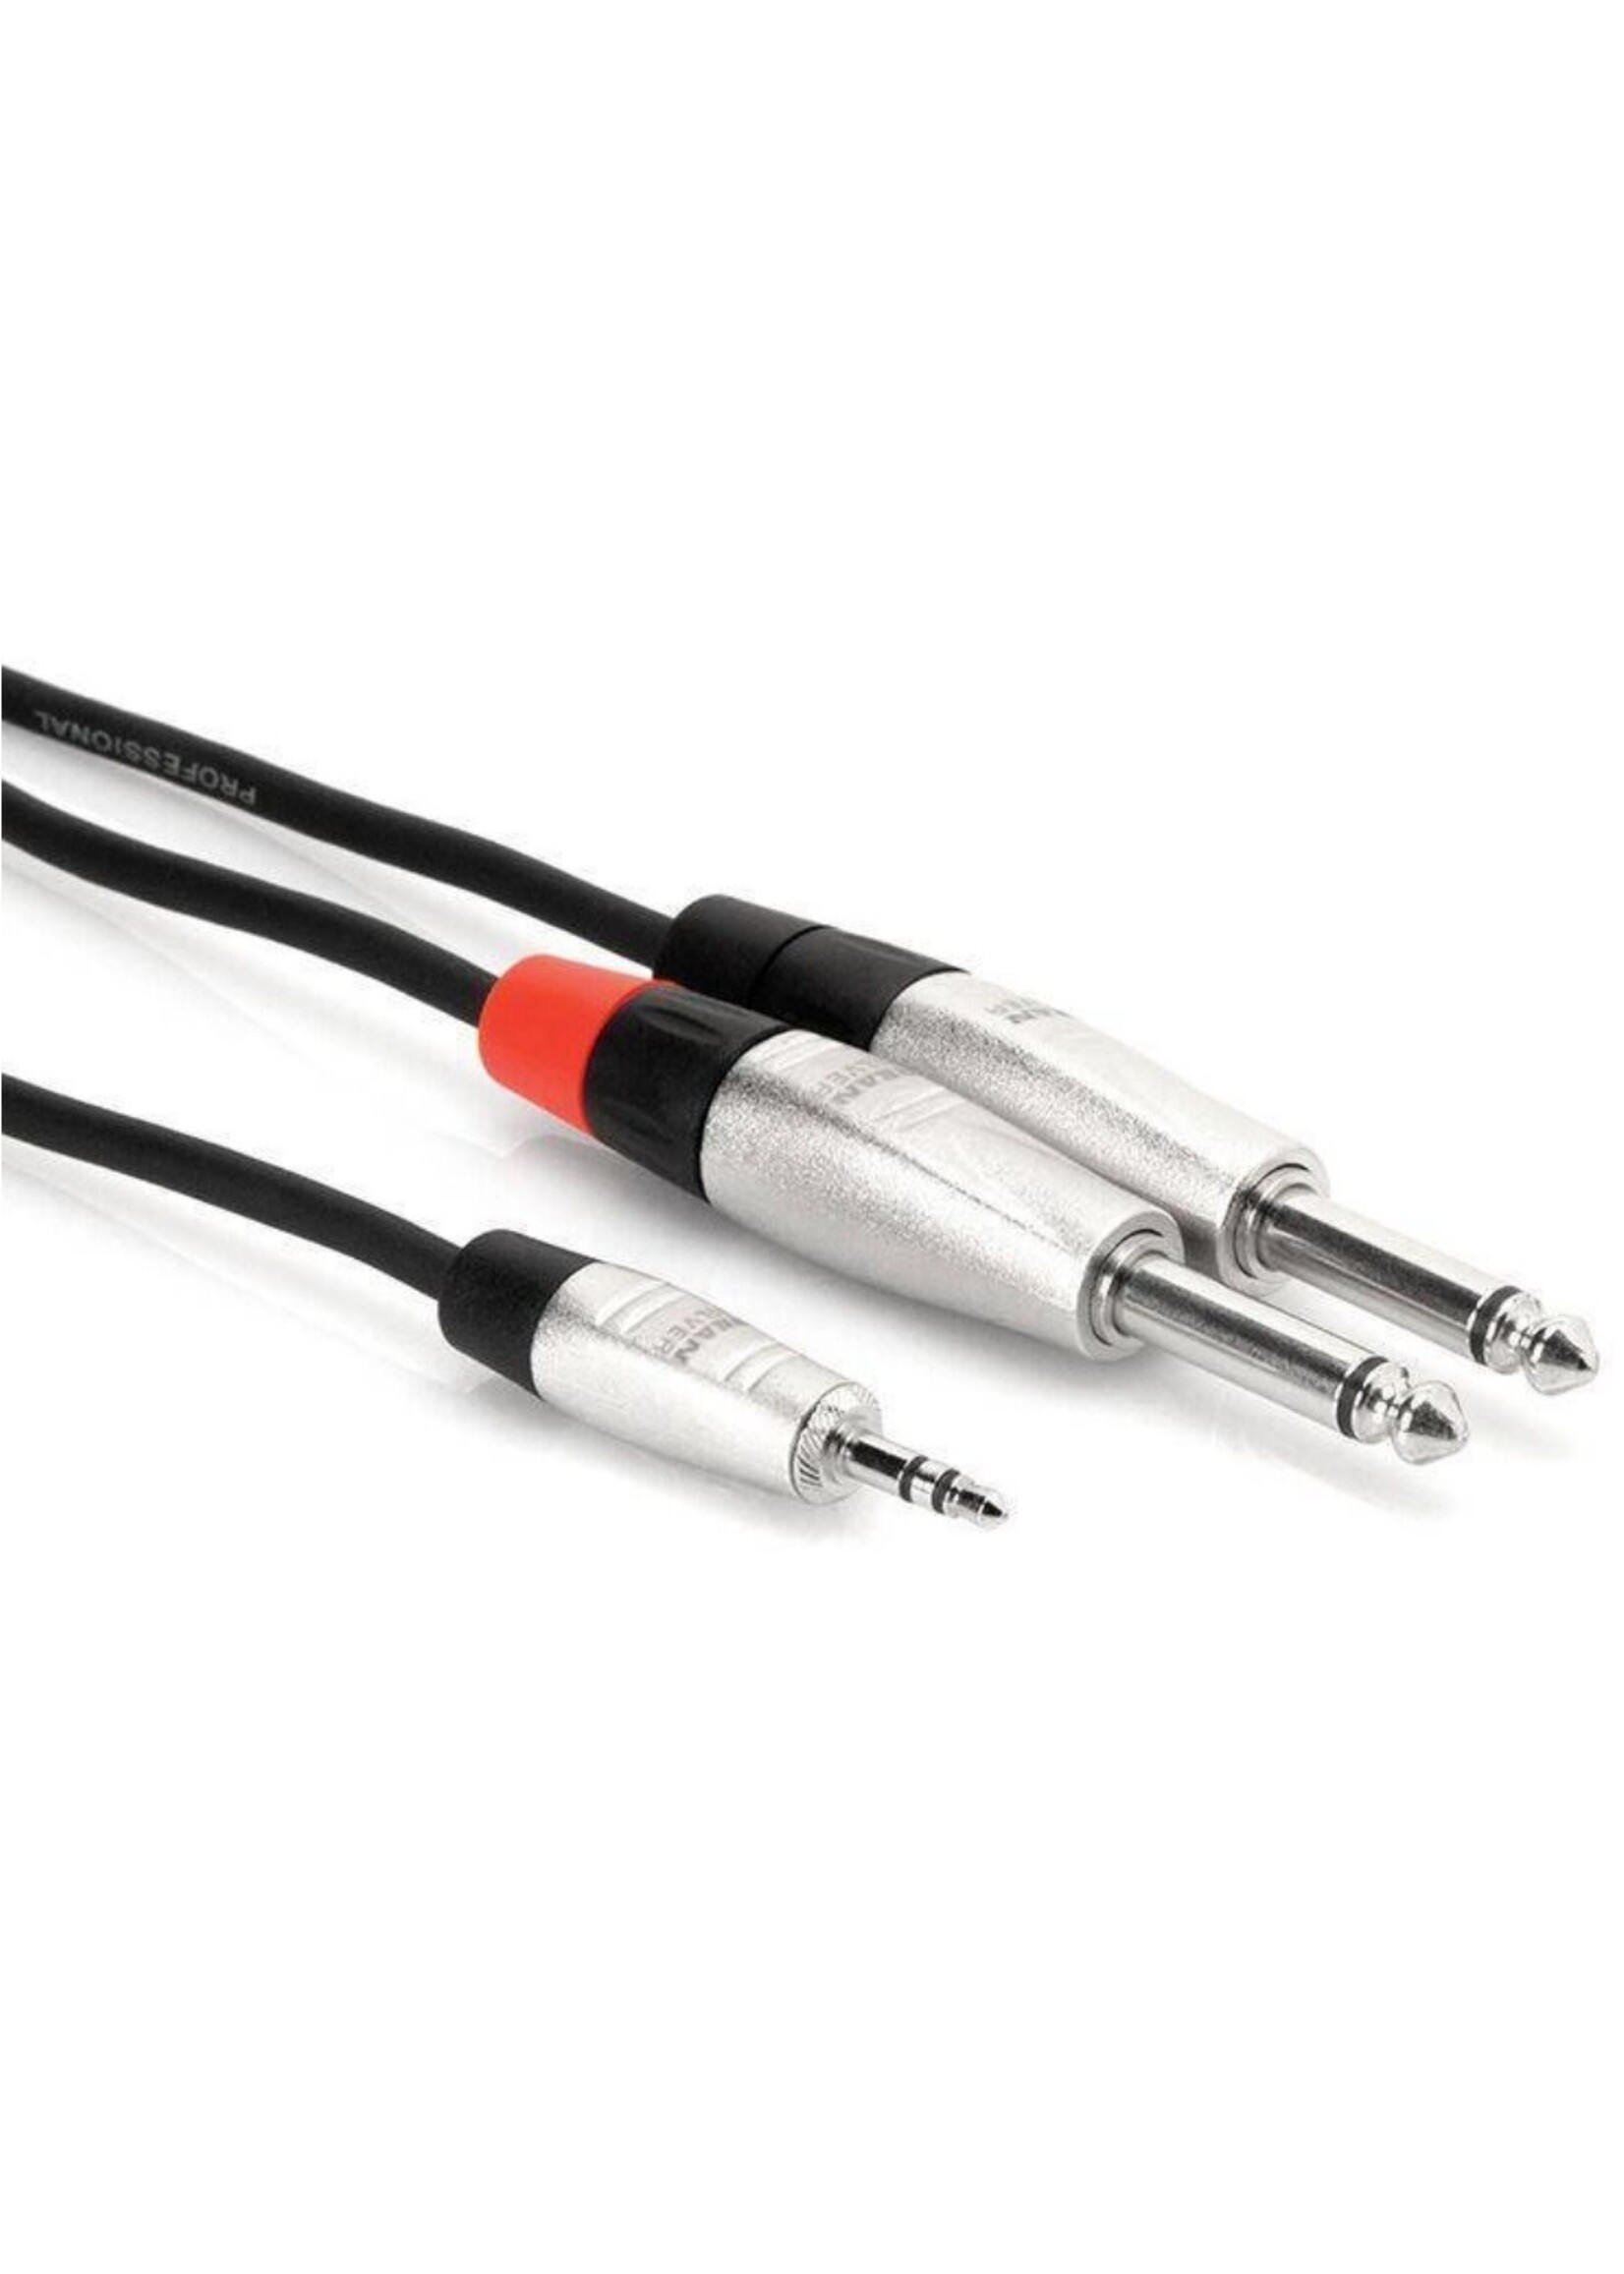 Hosa Pro Stereo Breakout Cable, 3.5mm TRS to Dual 1/4 inch TS, 3 Foot Model: # HMP-003Y